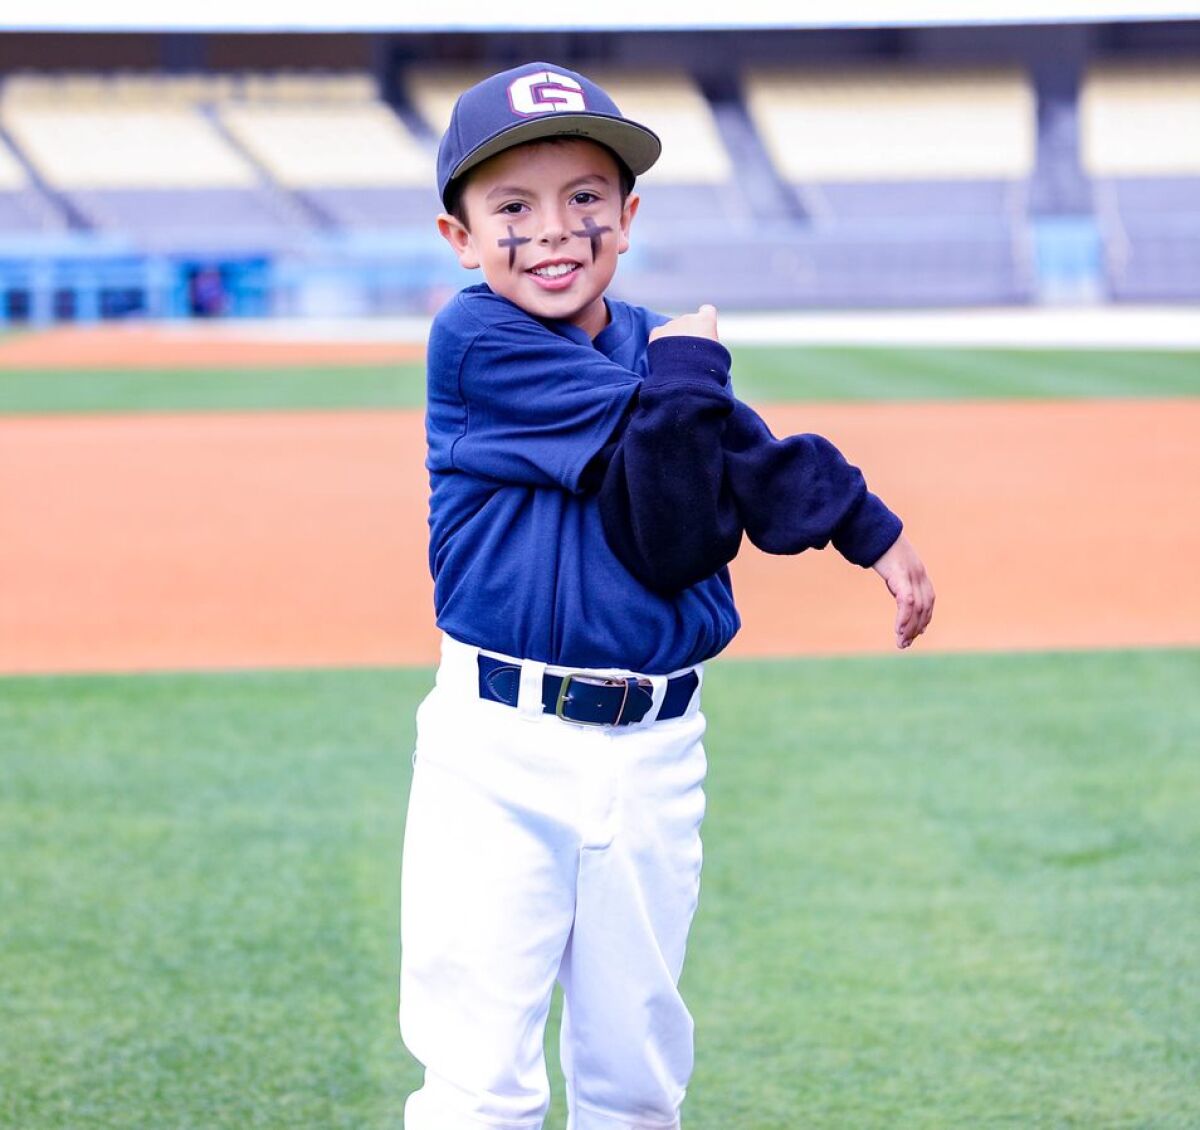 Evan Torres, the 8-year-old son of Garfield coach Ruben Torres, got to work out with players at Dodger Stadium on Saturday.